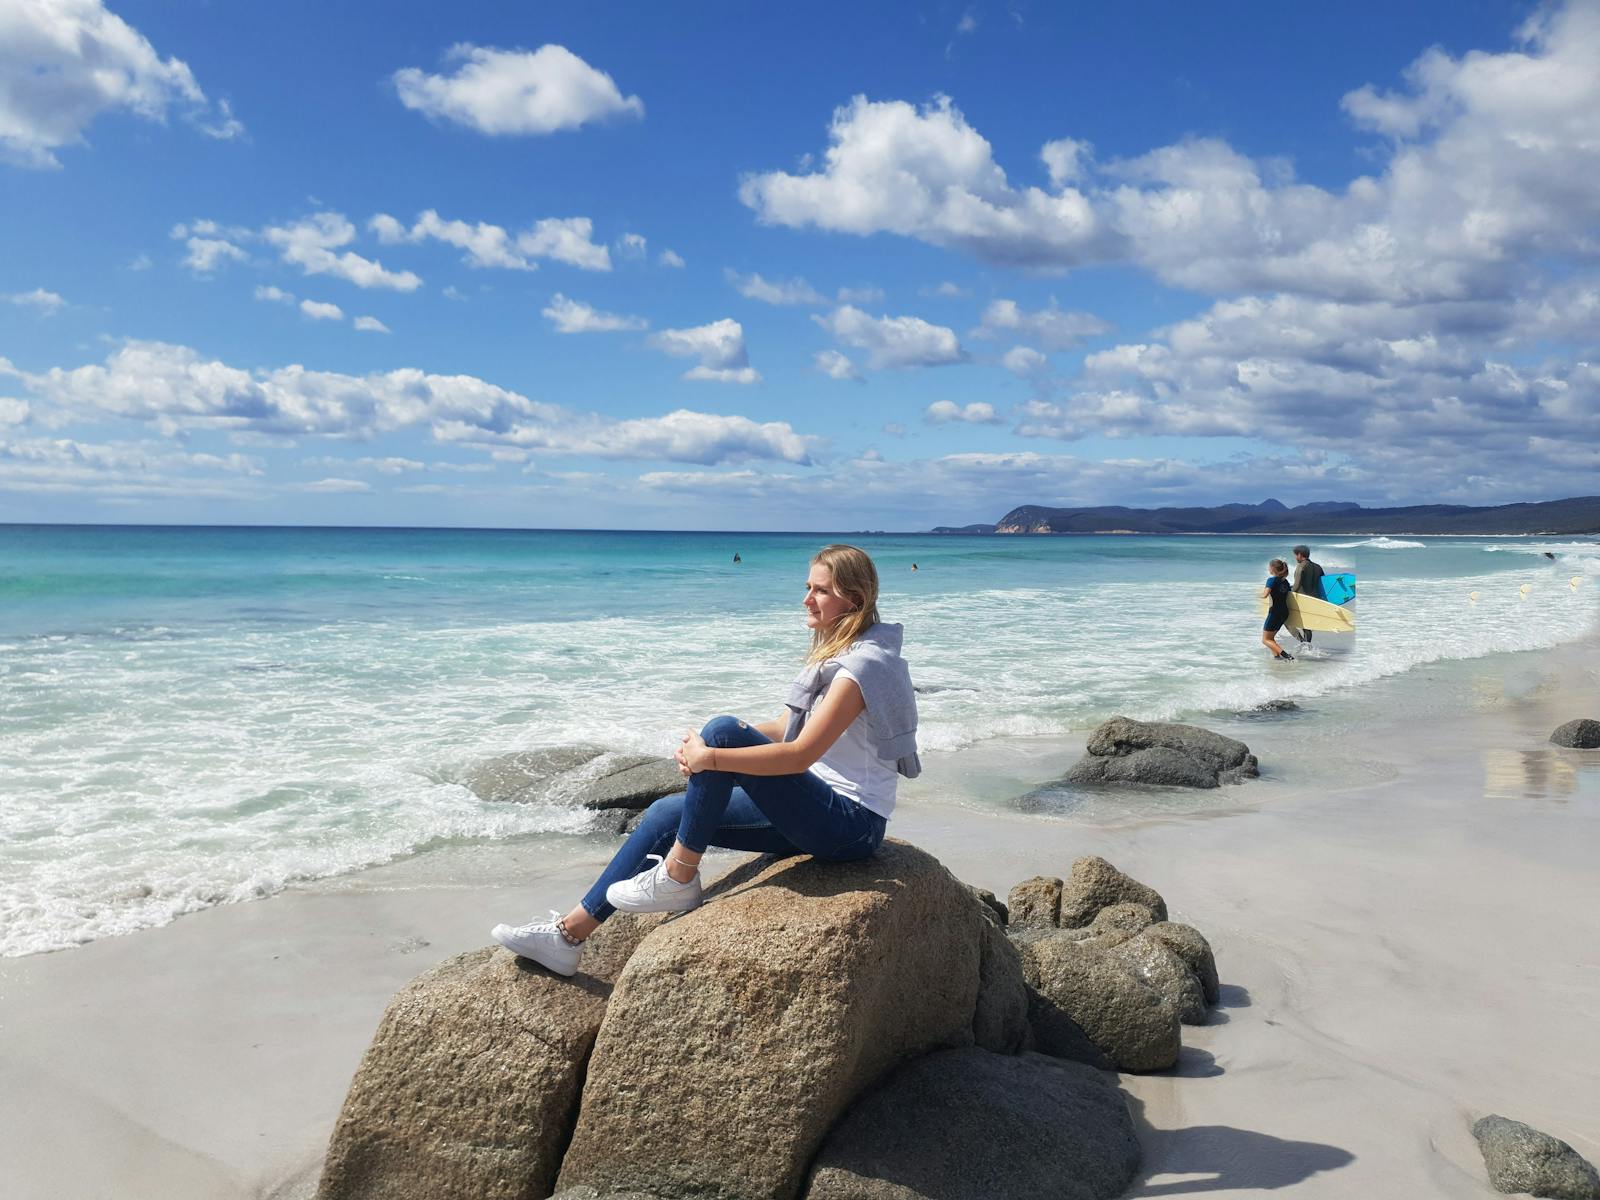 Enjoying the beautiful views at Friendly beaches in the Freycinet National Park